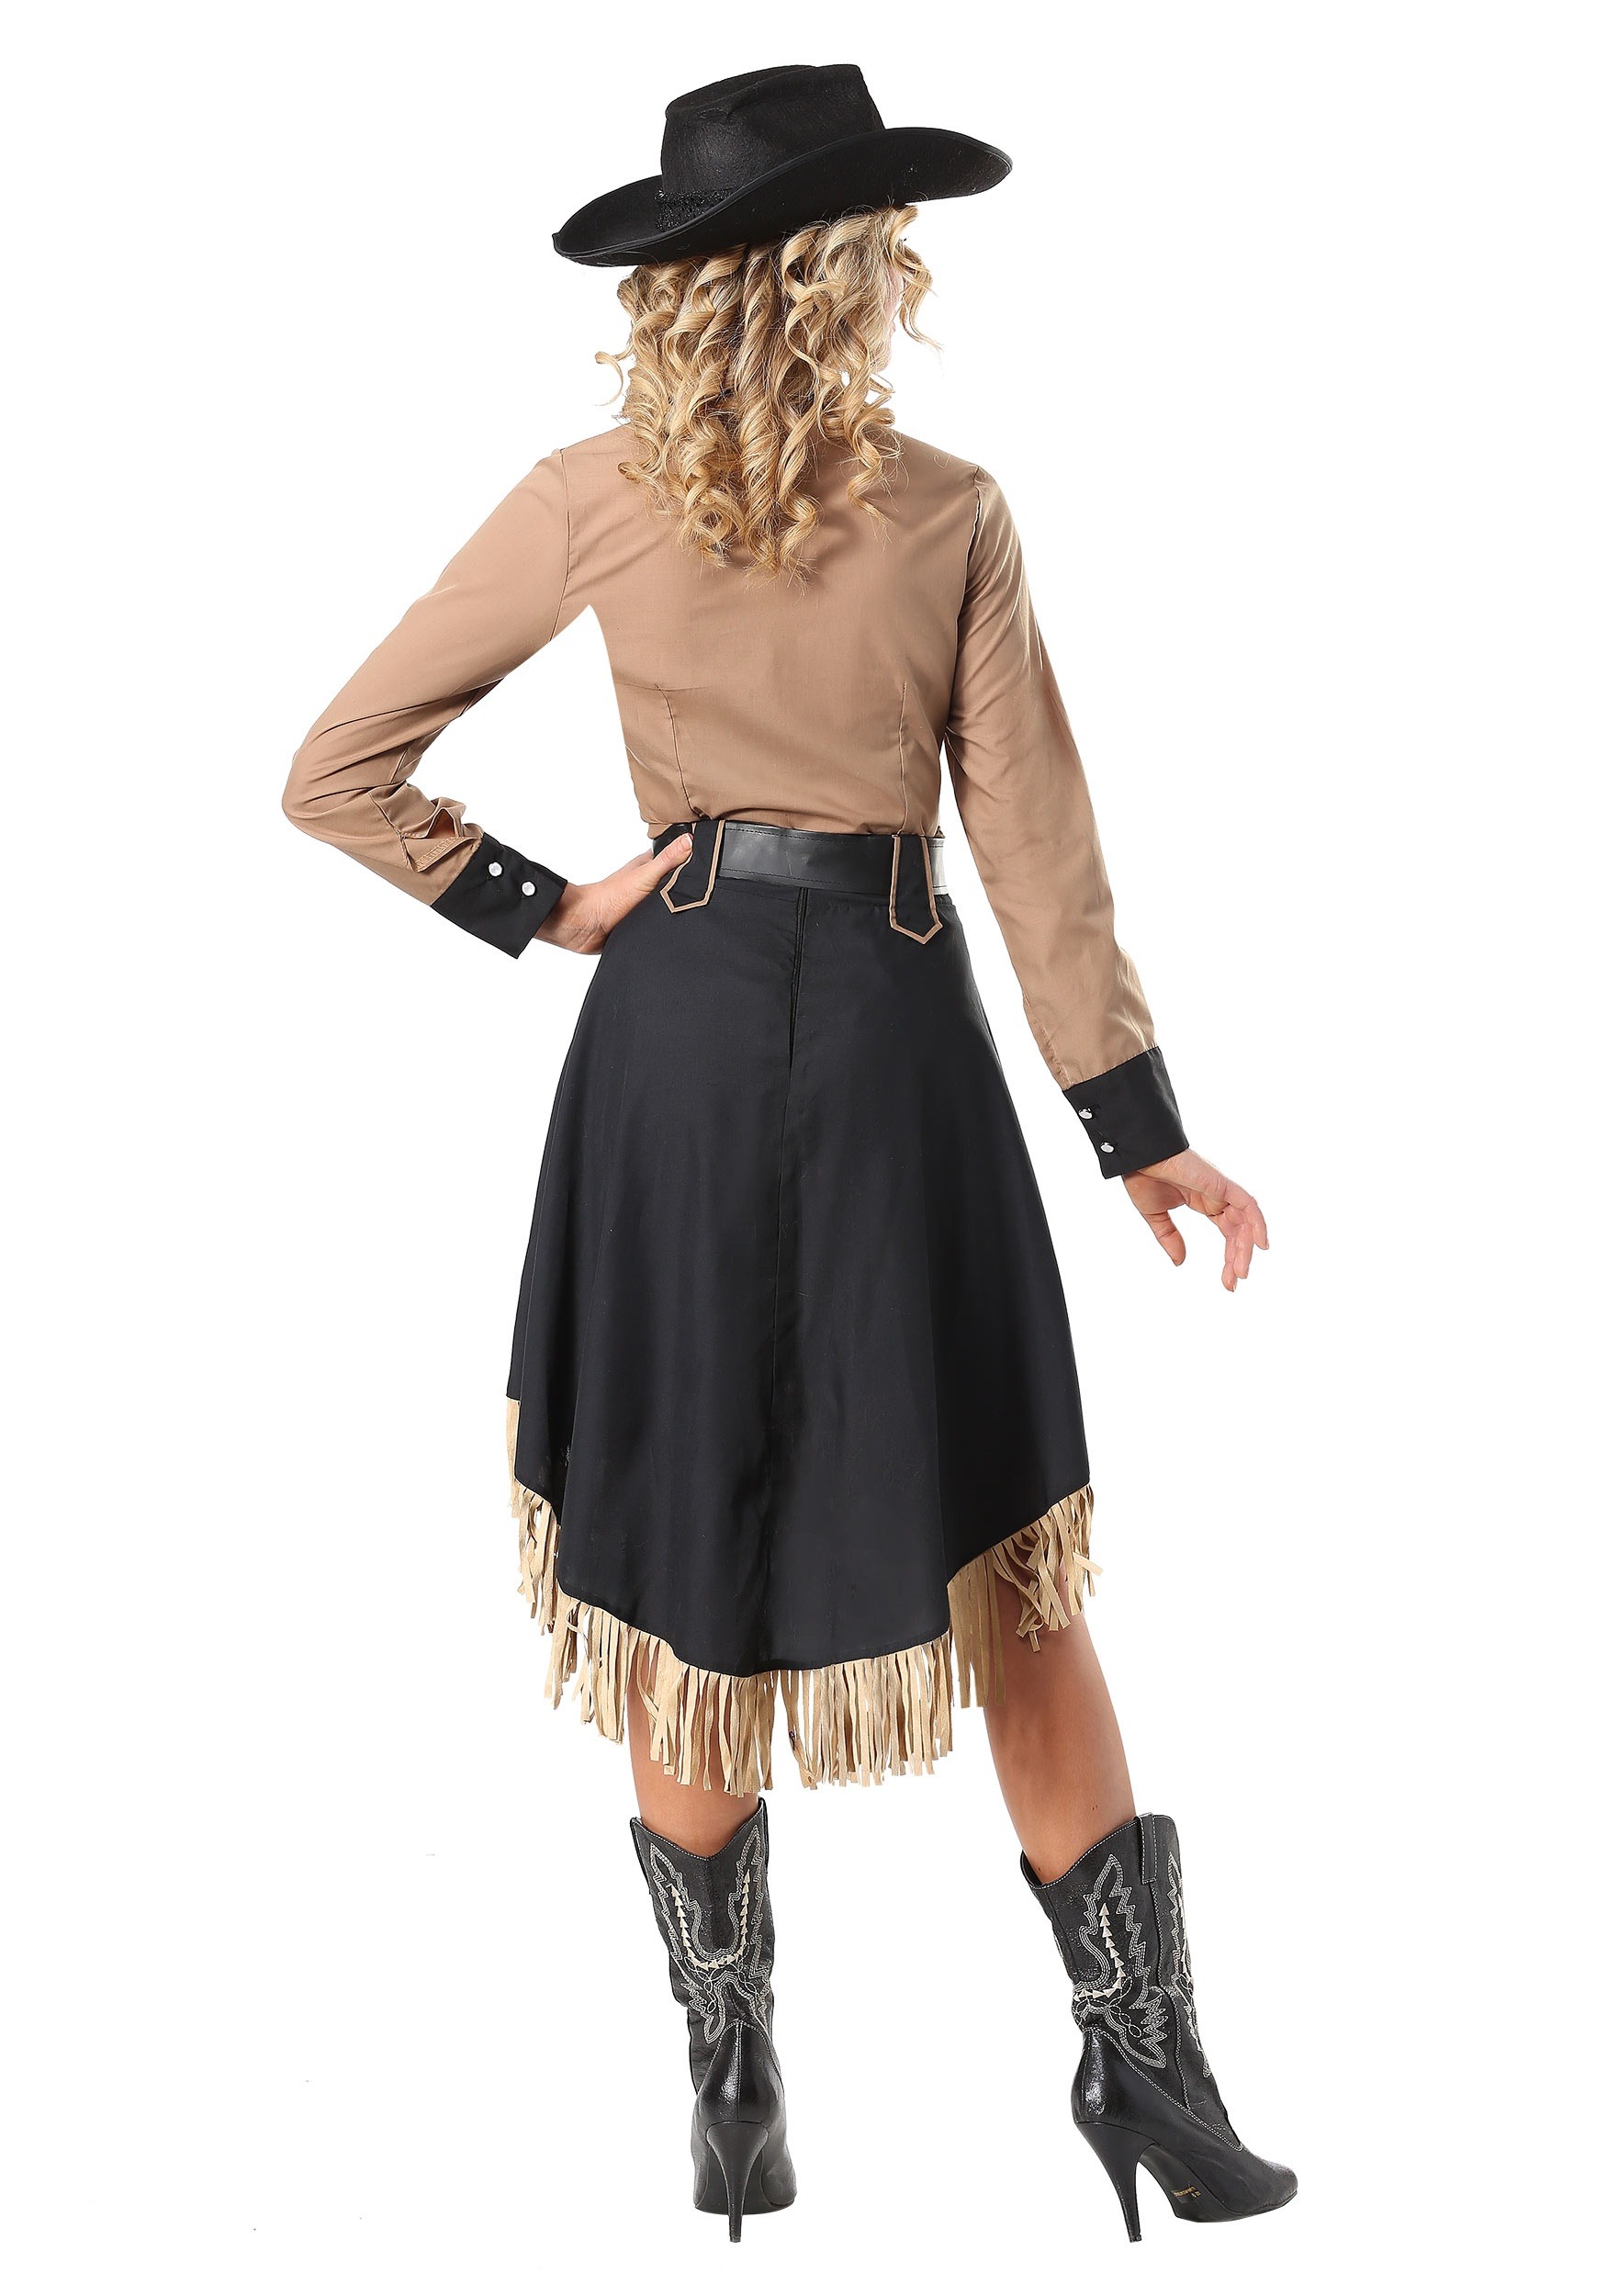 lasso-n-cowgirl-costume-for-women-western-costume-exclusive